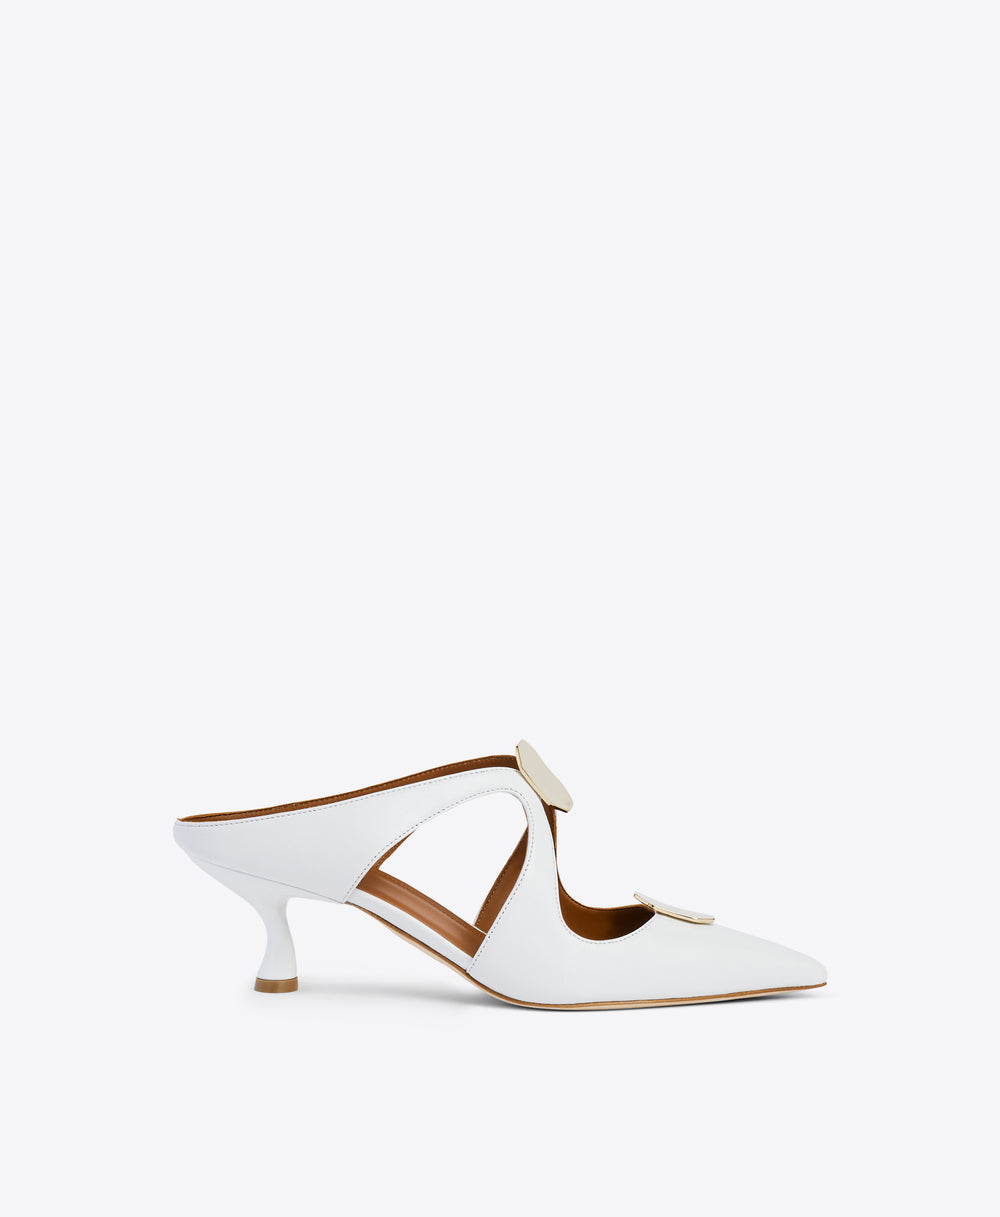 White Nappa Cut-out Mules - Pointed Toe with Ornaments on Curved Heel | Malone Souliers